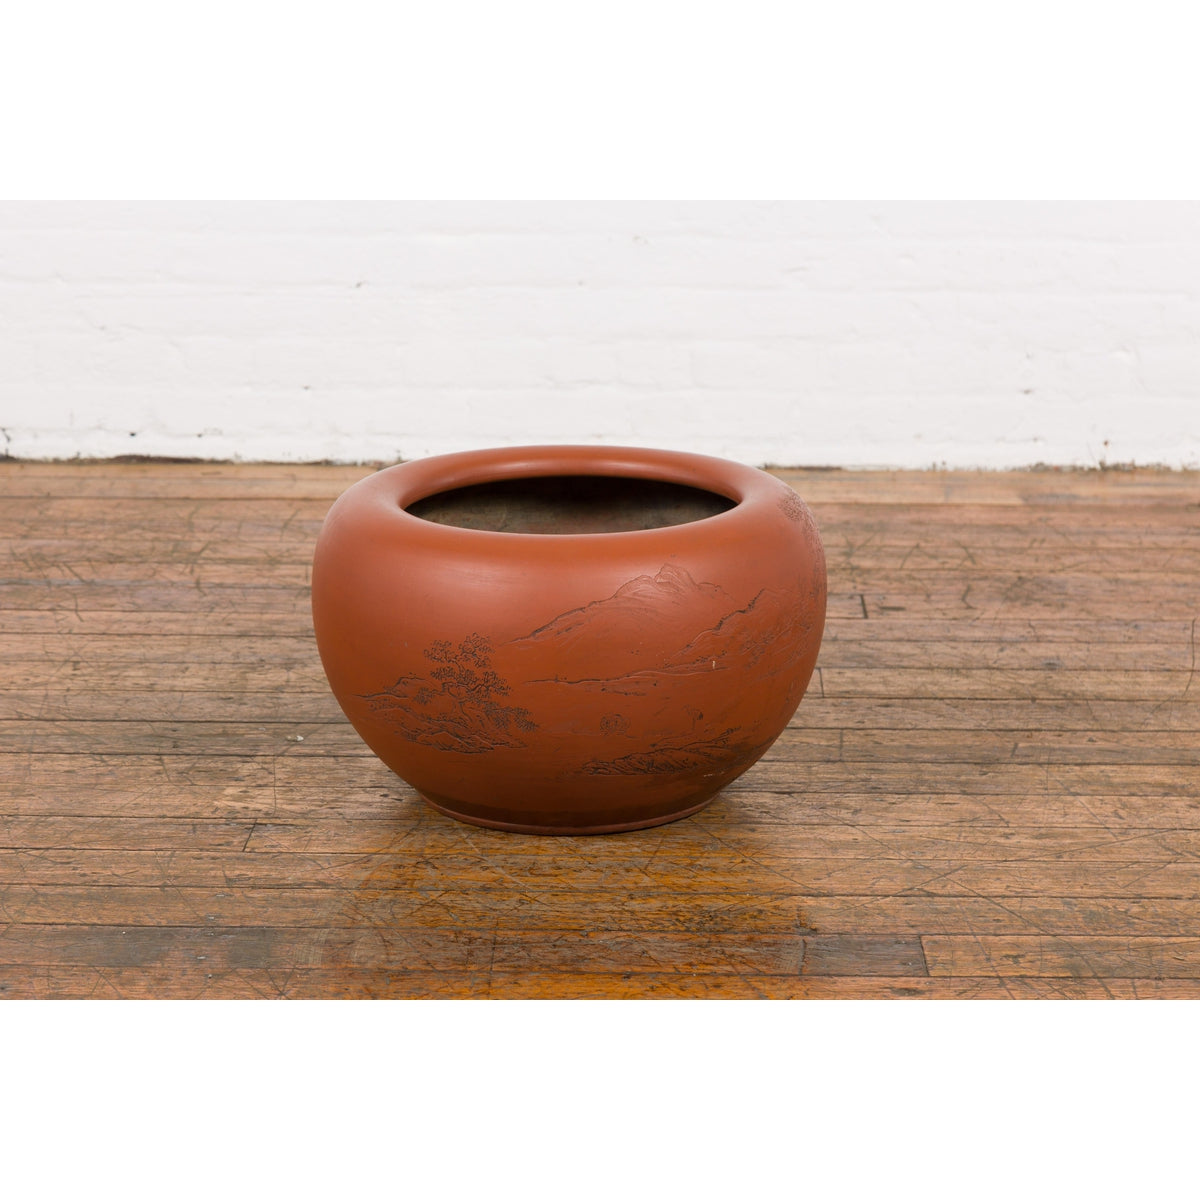 Orange Circular Antique Planter with Etched Design-YN7819-9. Asian & Chinese Furniture, Art, Antiques, Vintage Home Décor for sale at FEA Home